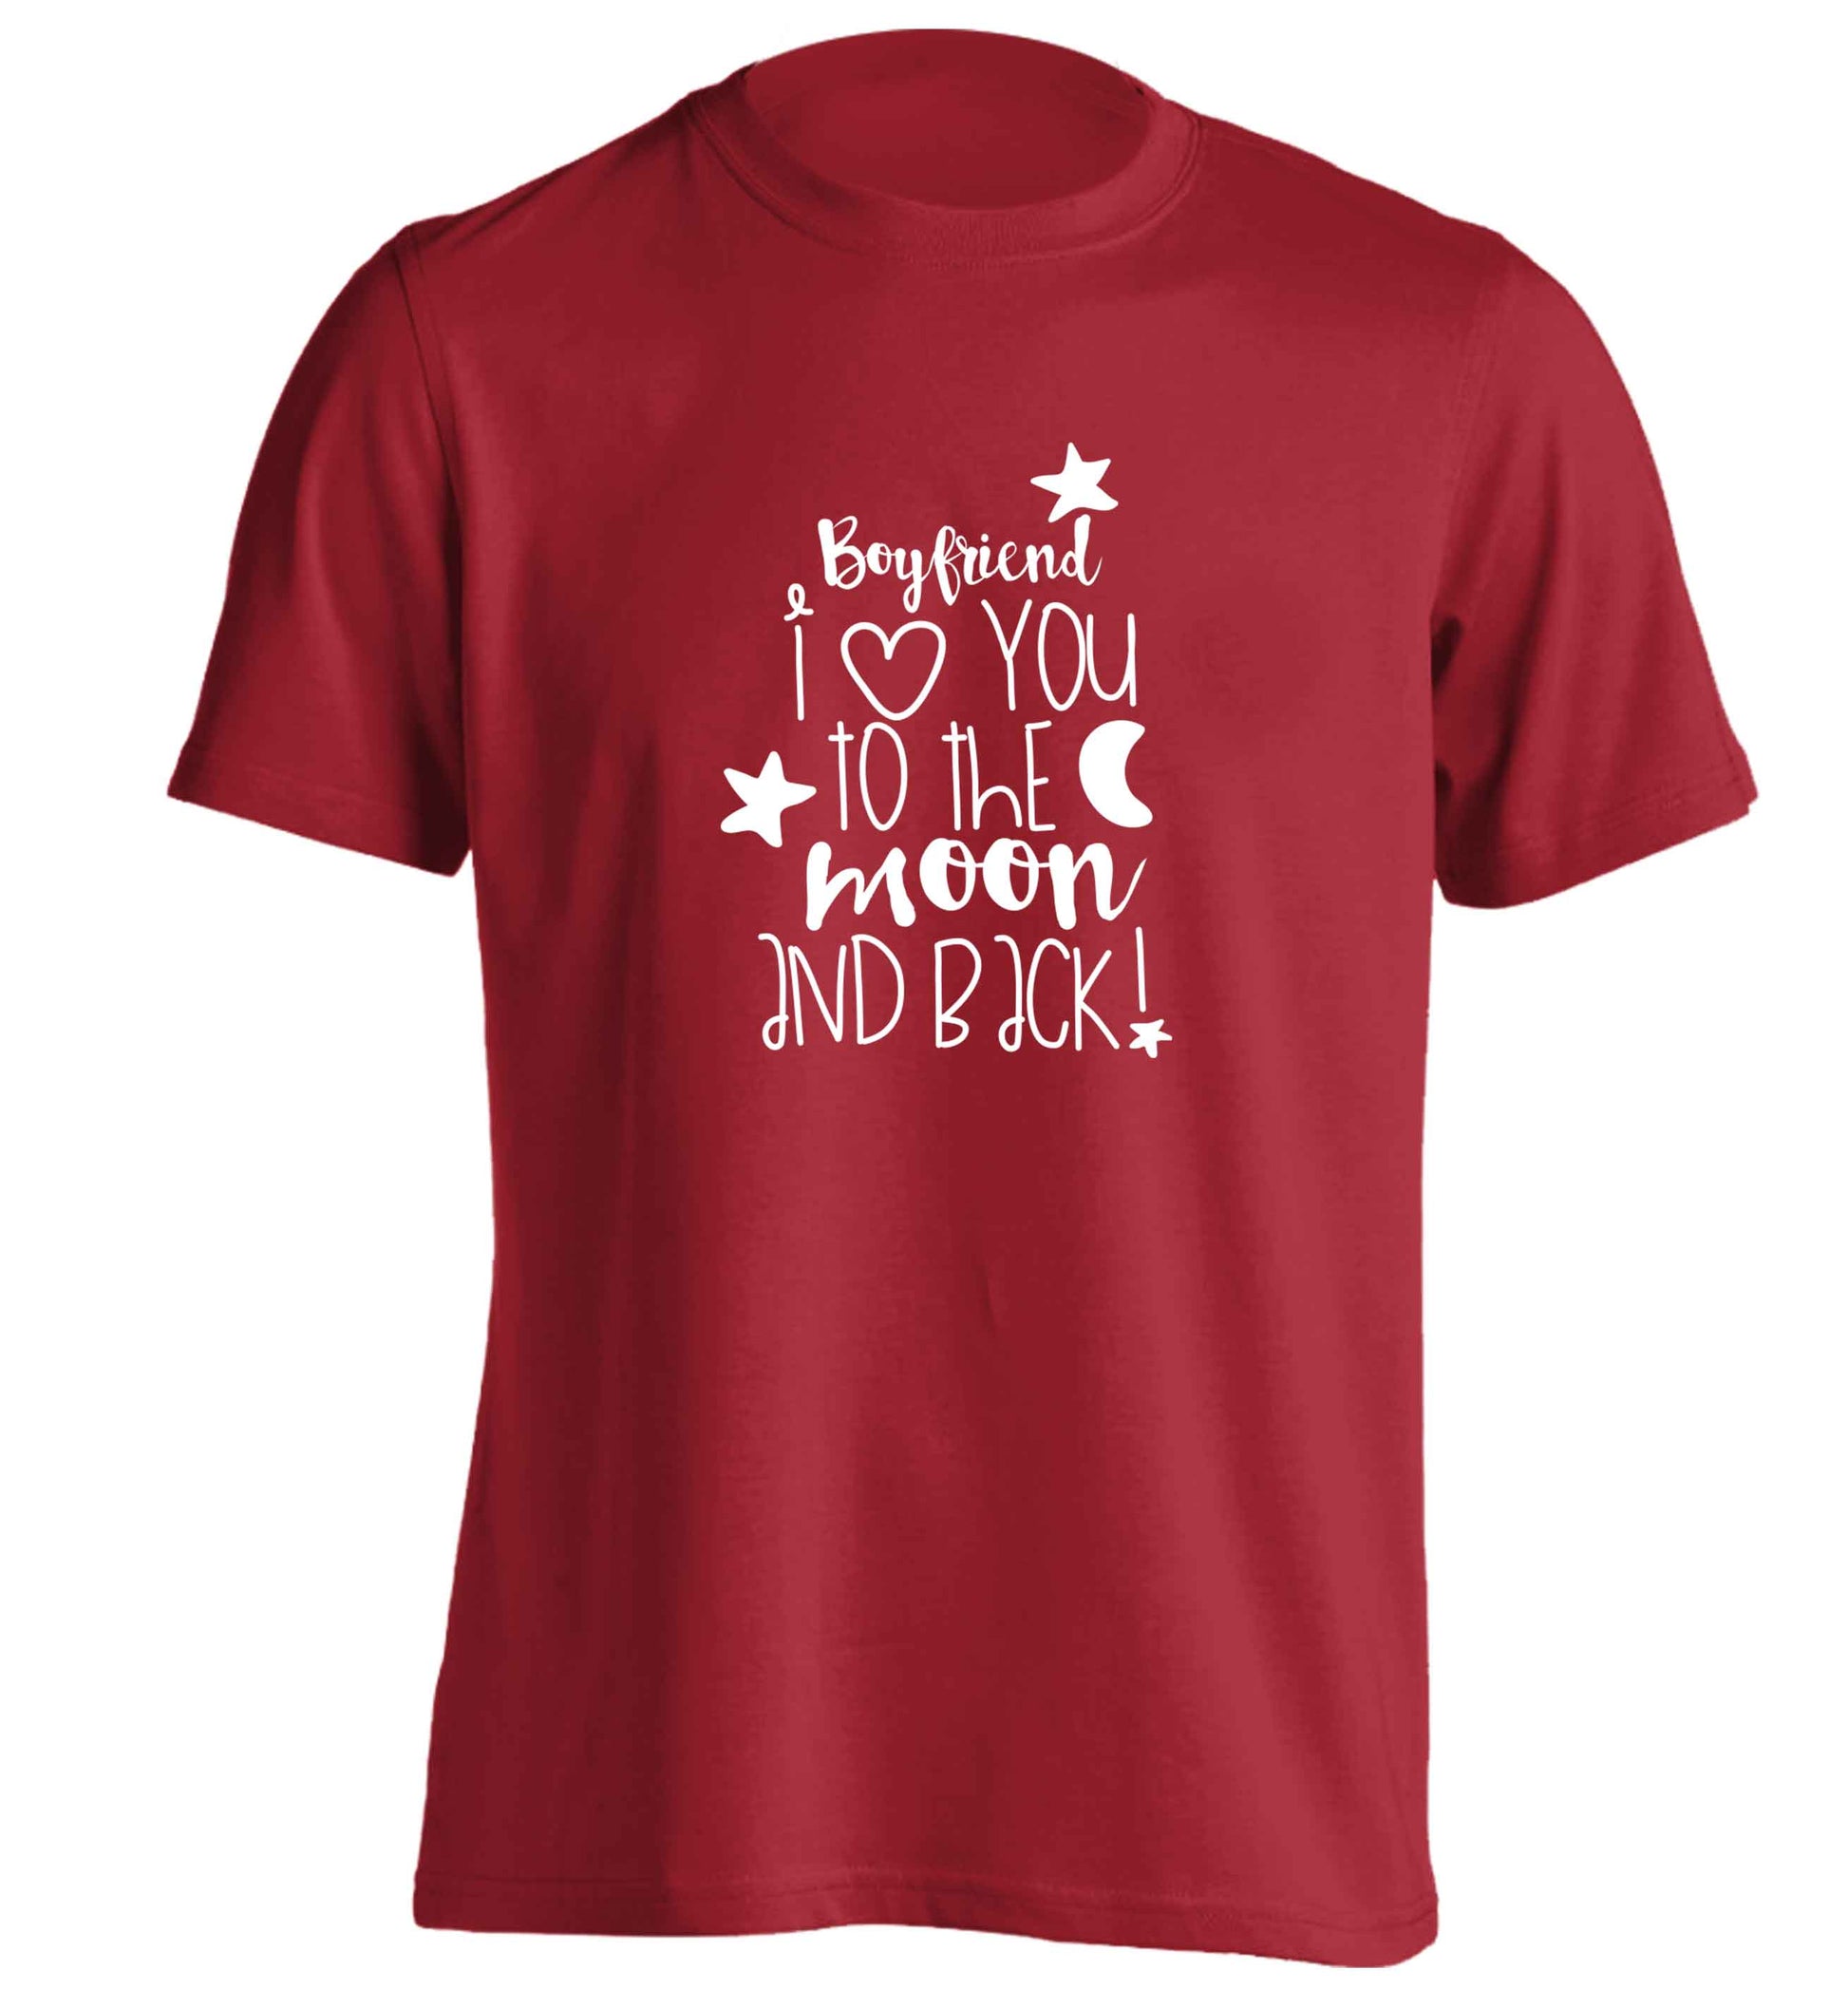 Boyfriend I love you to the moon and back adults unisex red Tshirt 2XL